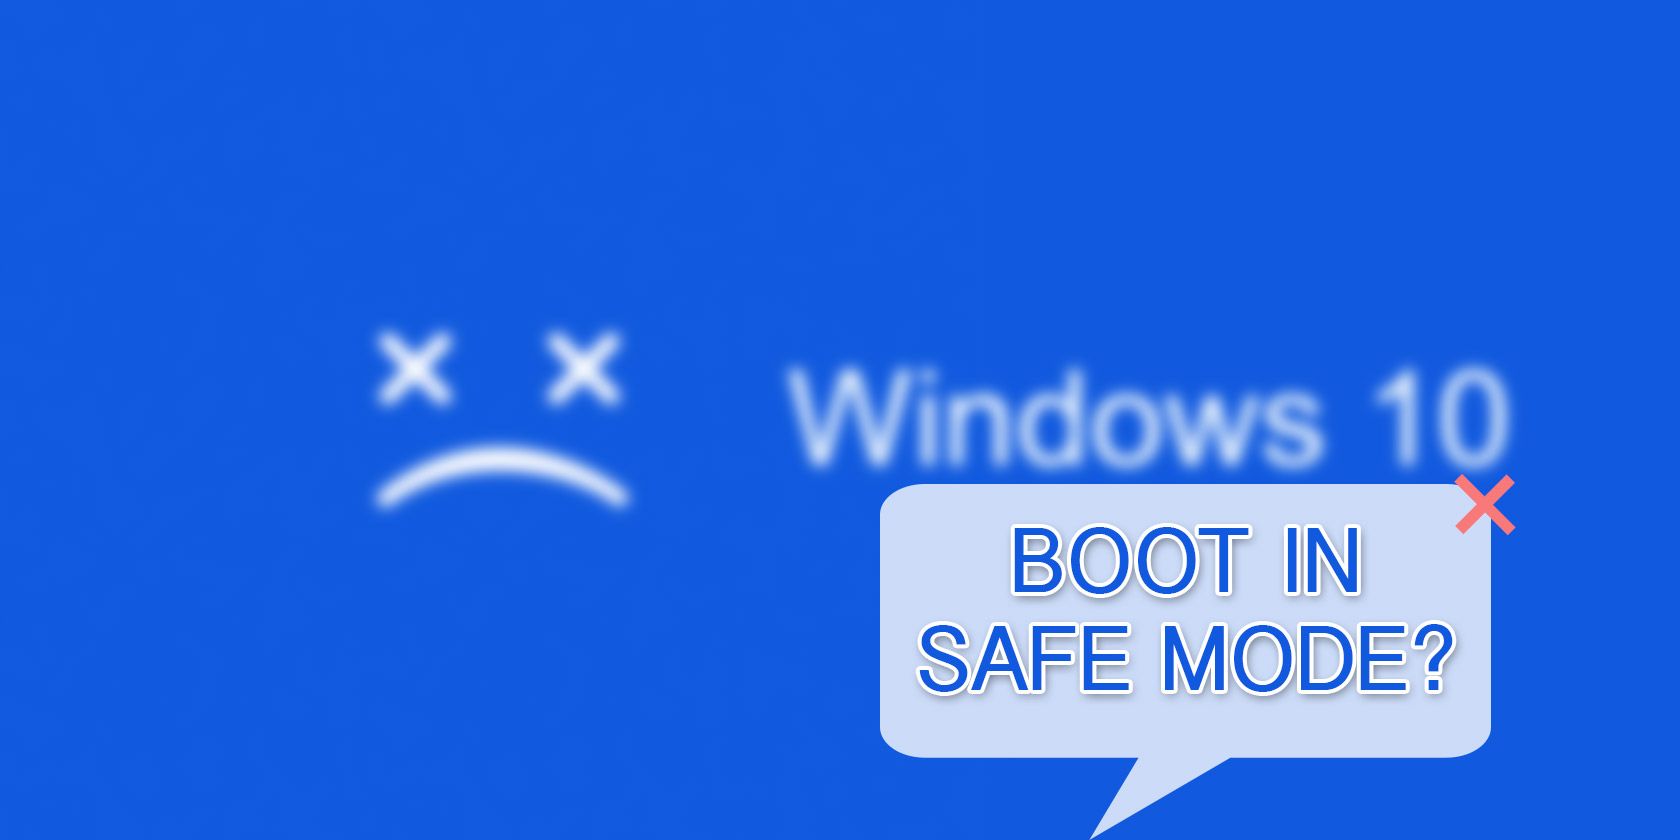 How to Boot in Safe Mode on Windows 10